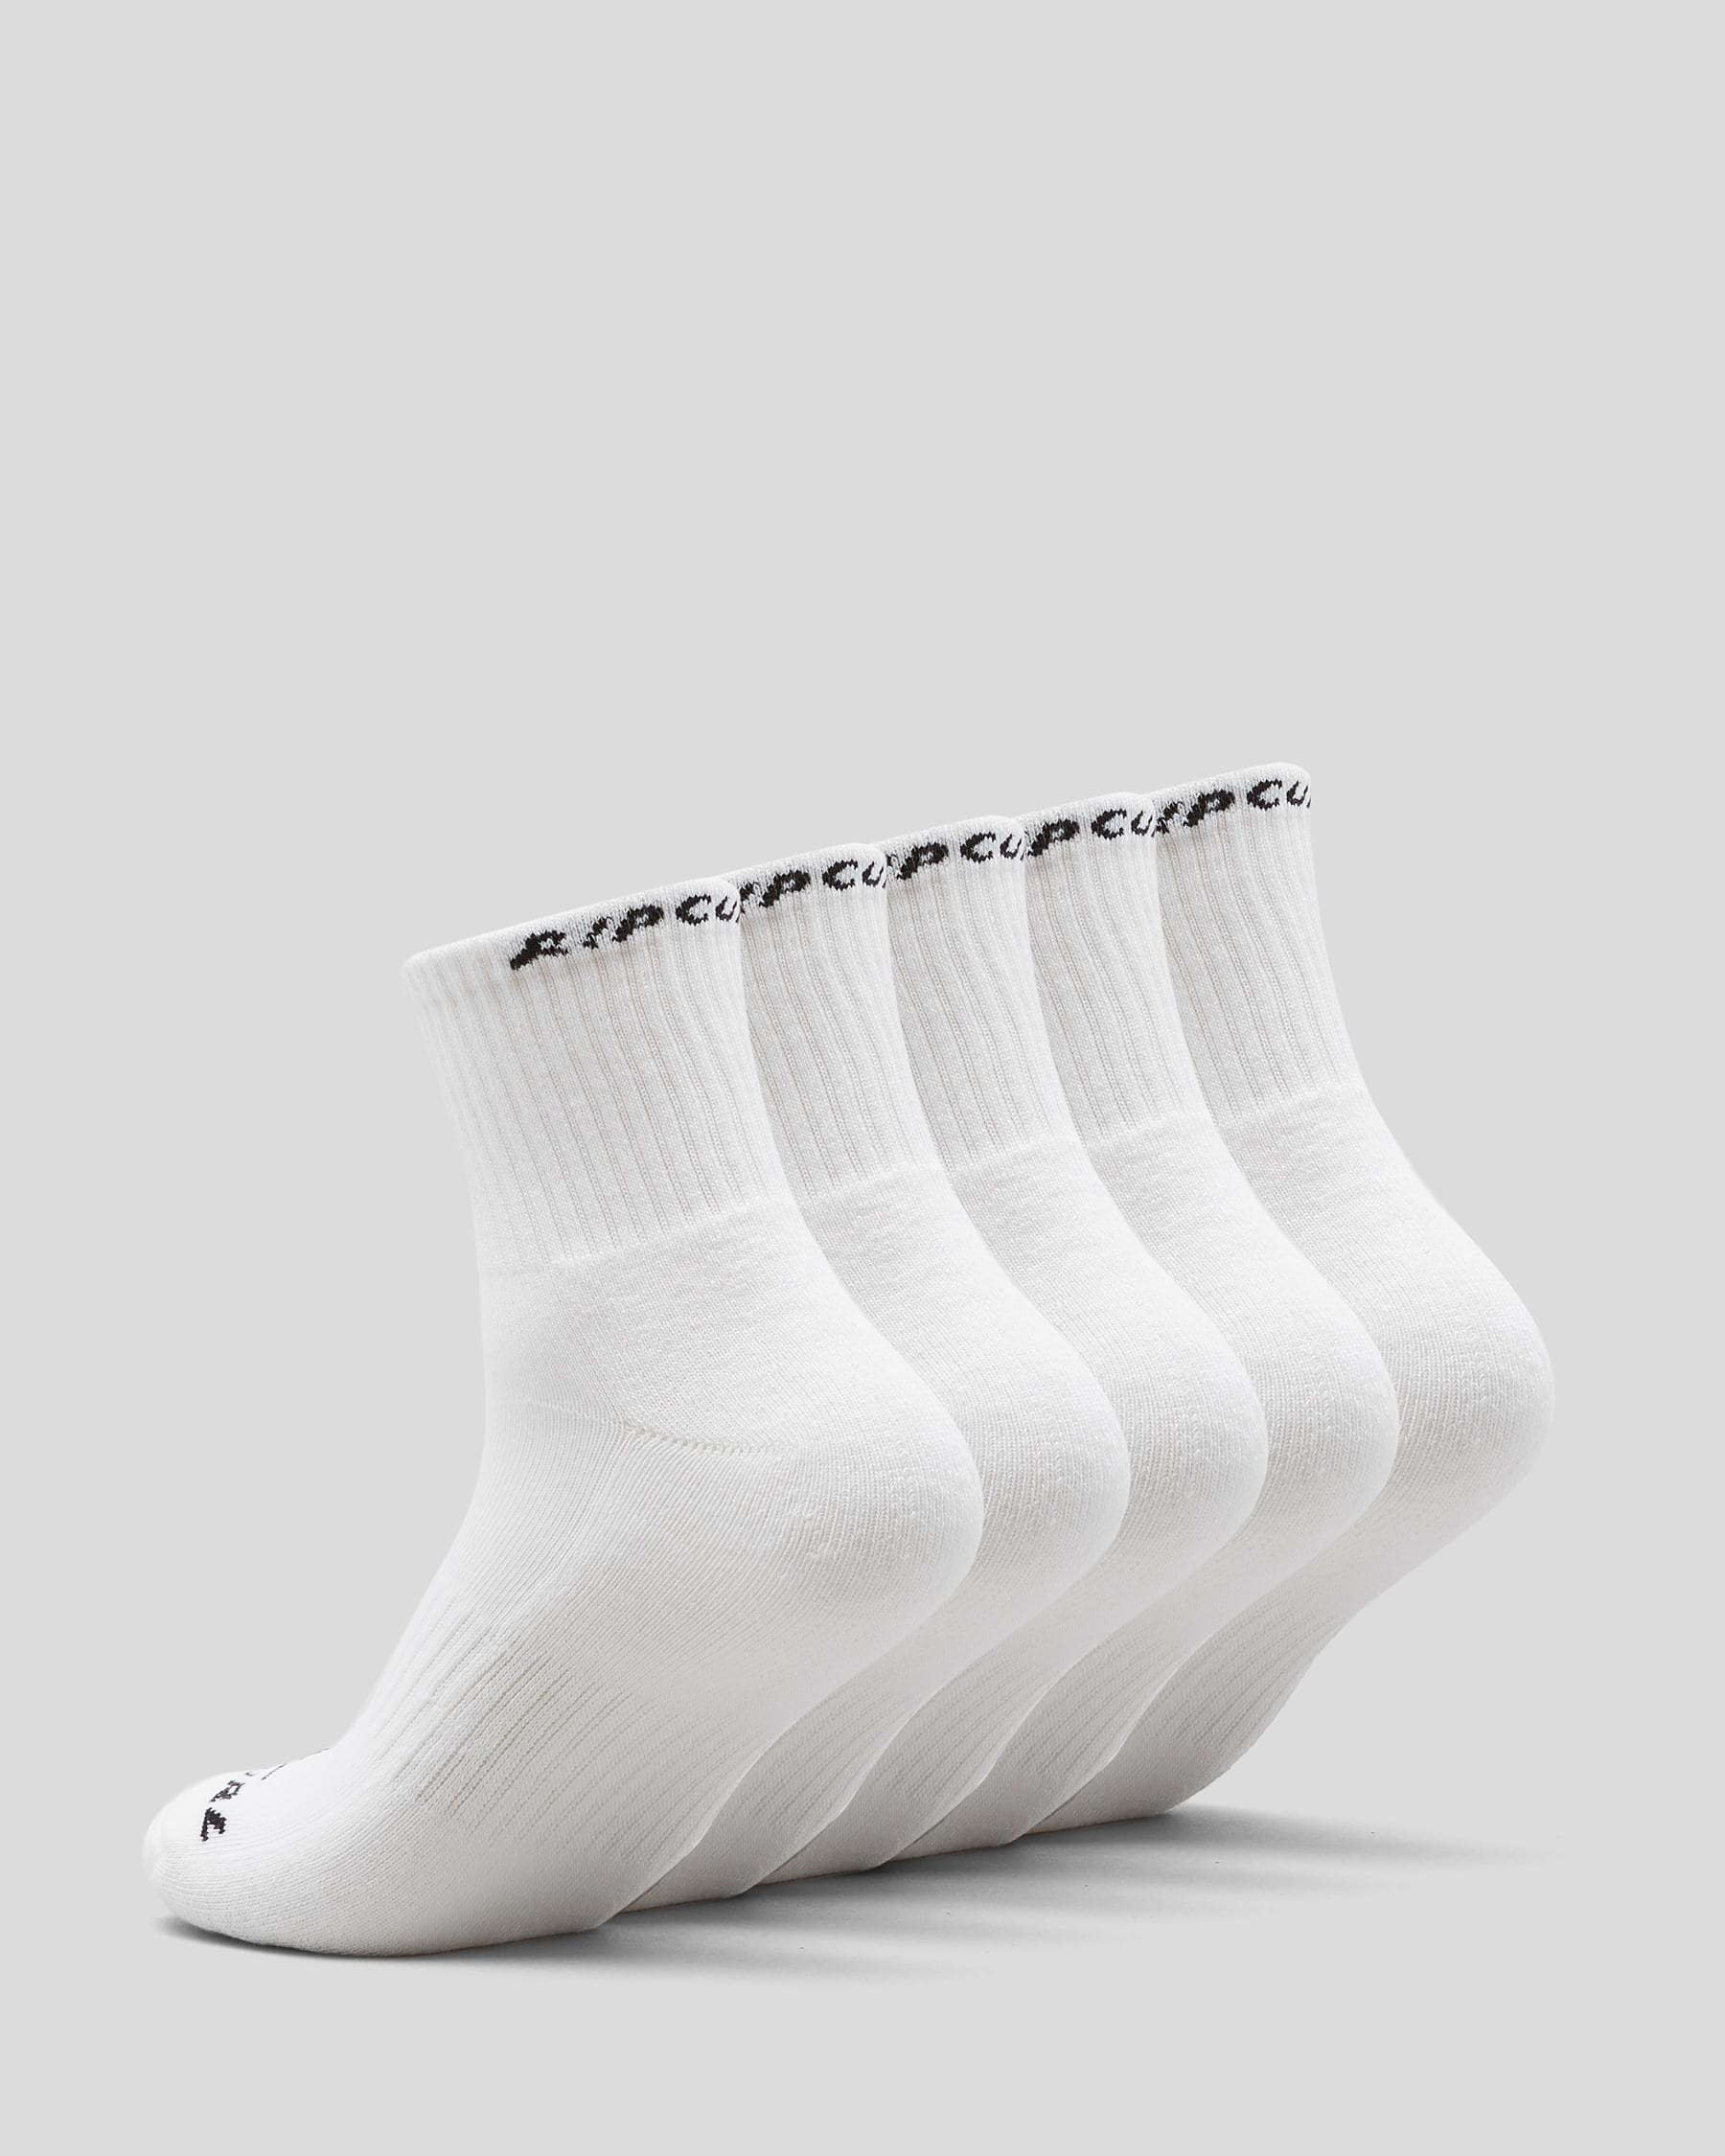 Shop Rip Curl Corp Crew Socks 5 Pack In White - Fast Shipping & Easy ...